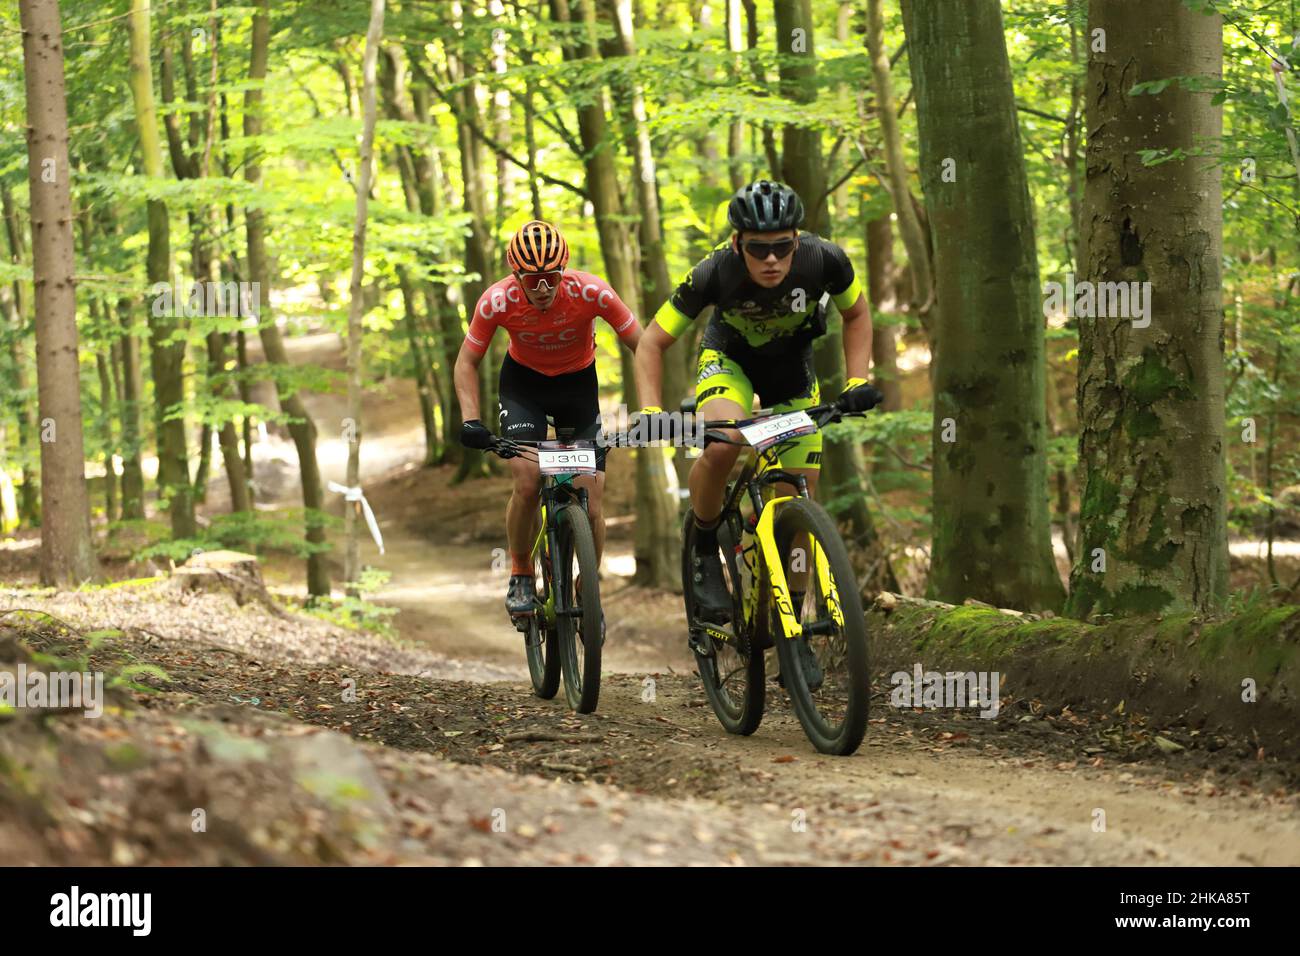 7R CST MTB Gdynia Marathon, Gdynia, Poland - 20 Sep 2020: XCM Polish Championship. The competitors racing along the forest roads of the Tricity Landsc Stock Photo